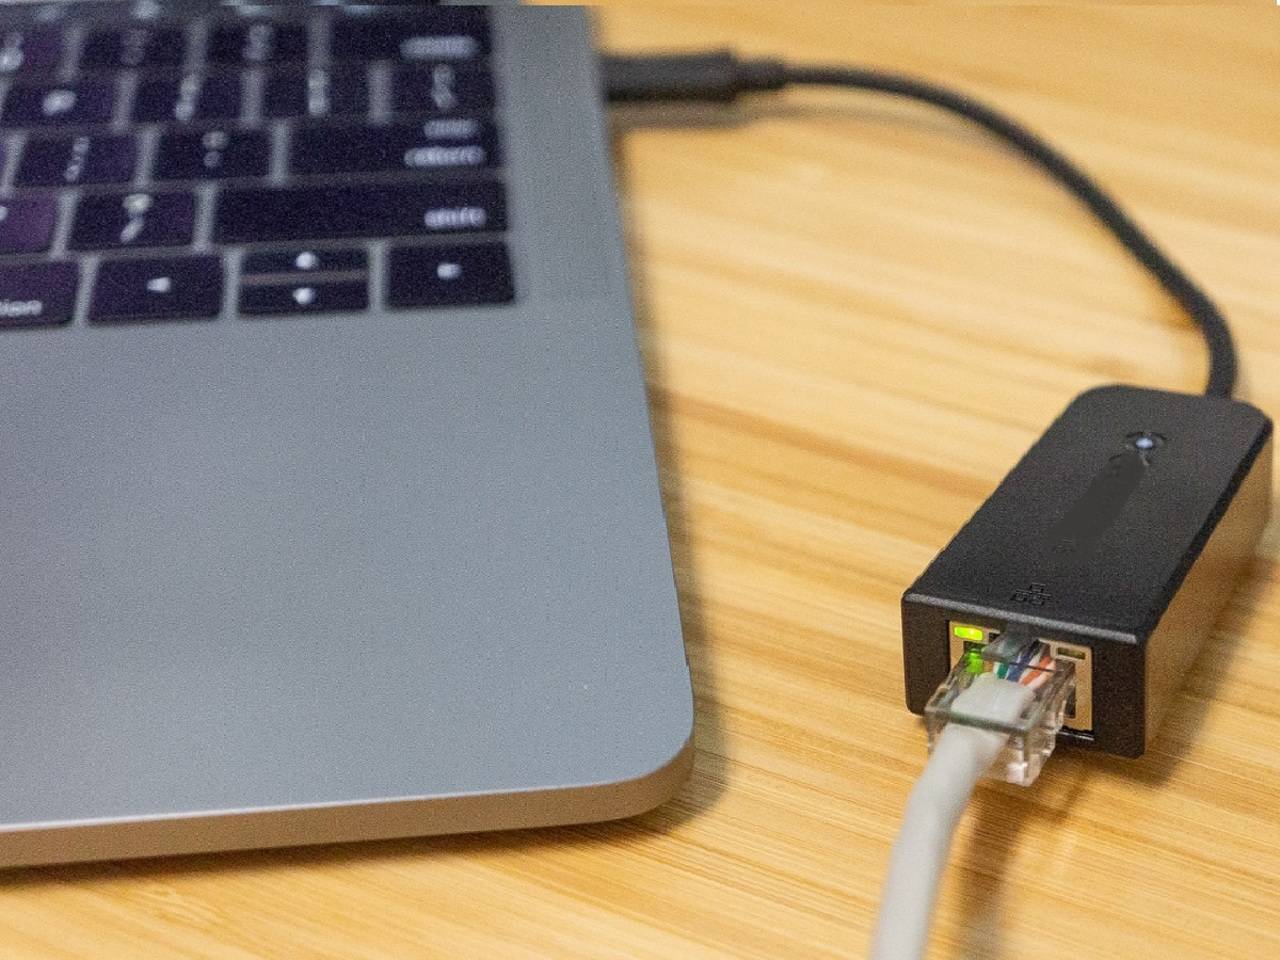 USB Ethernet Adapters For Connecting Computer To The Internet - of India